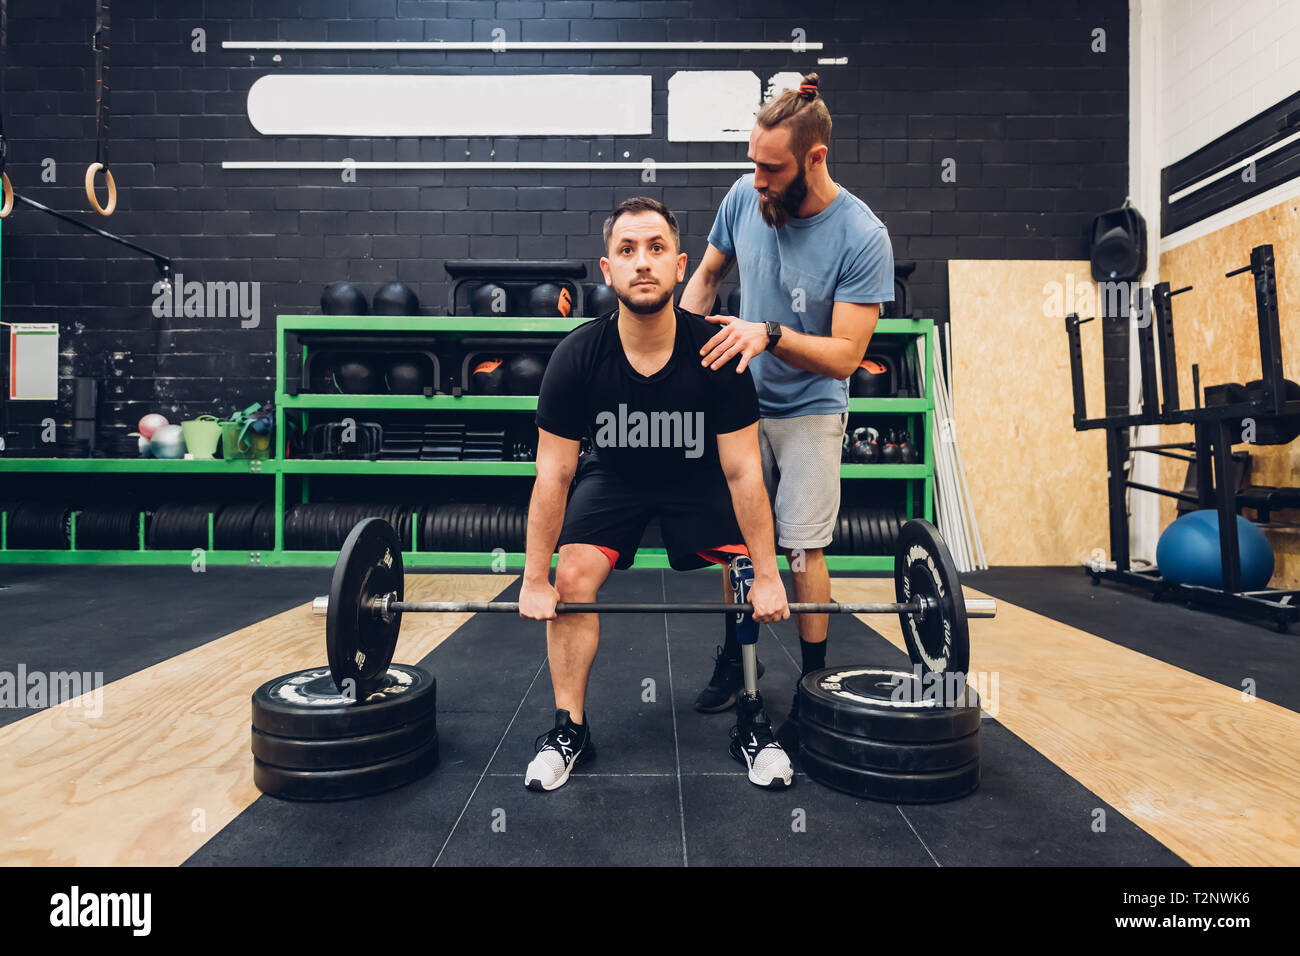 Man with prosthetic leg weight training in gym Stock Photo